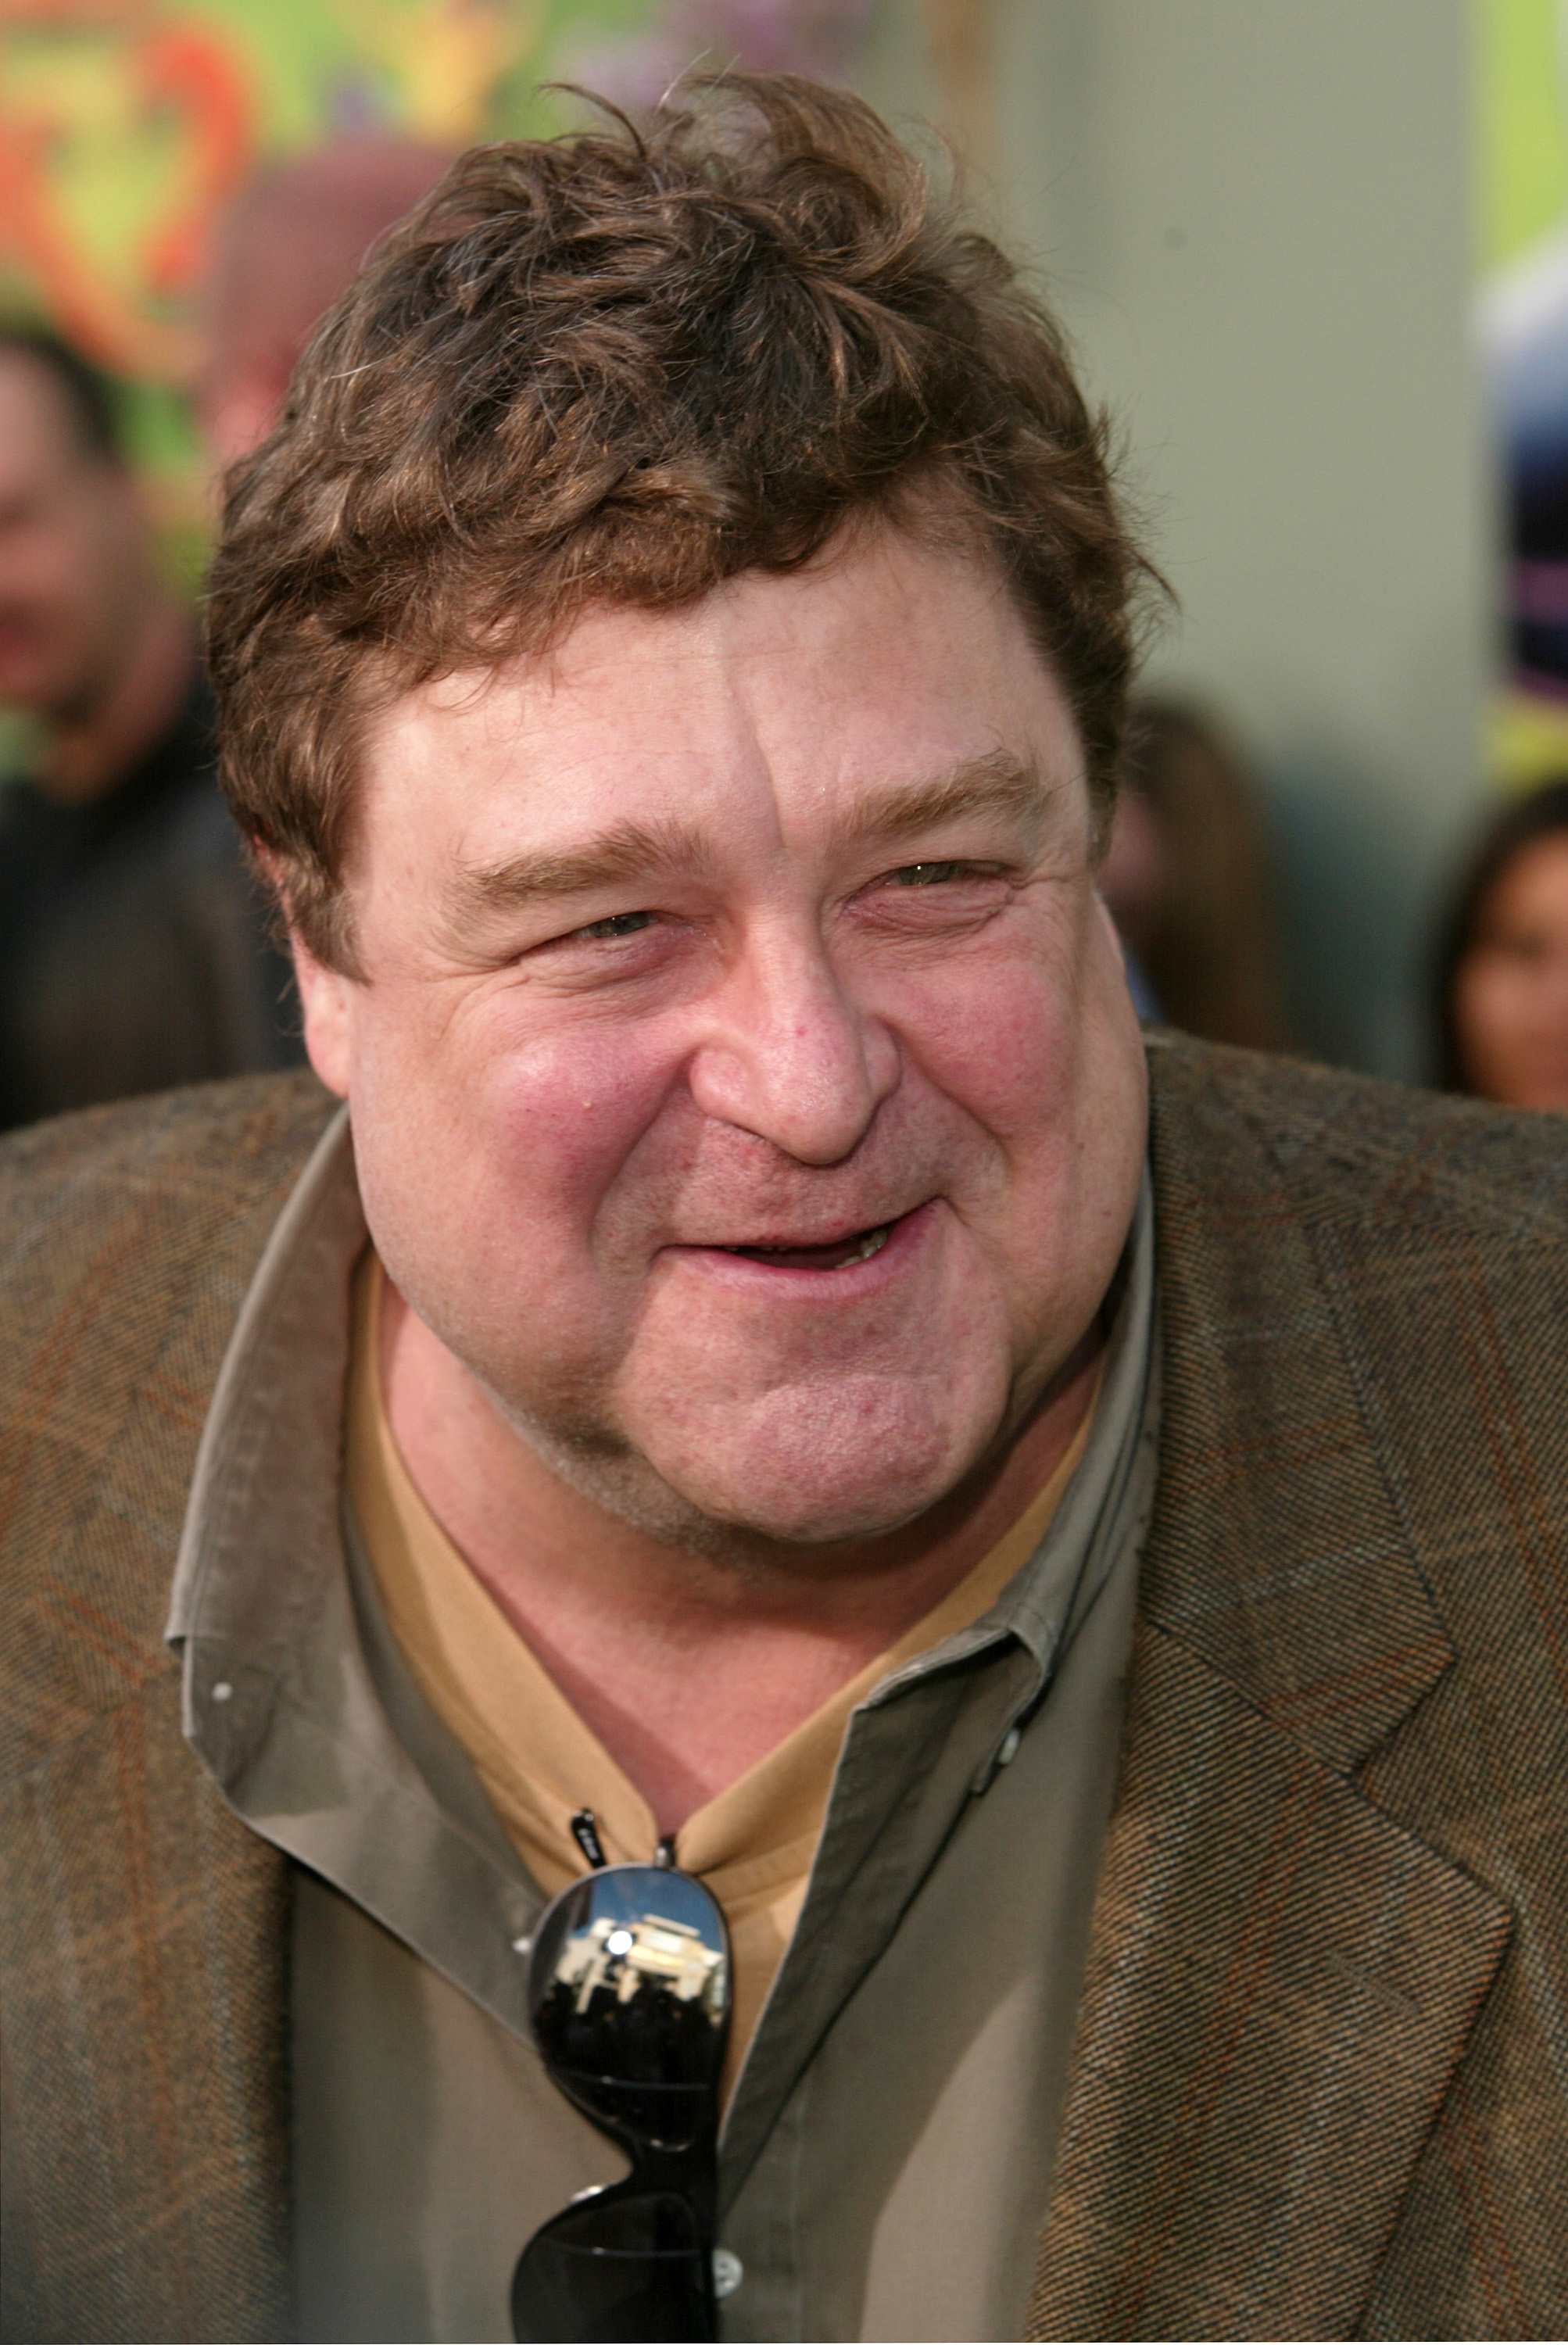 John Goodman at The El Capitan Theater in February 2003 in Hollywood, California | Source: Getty Images